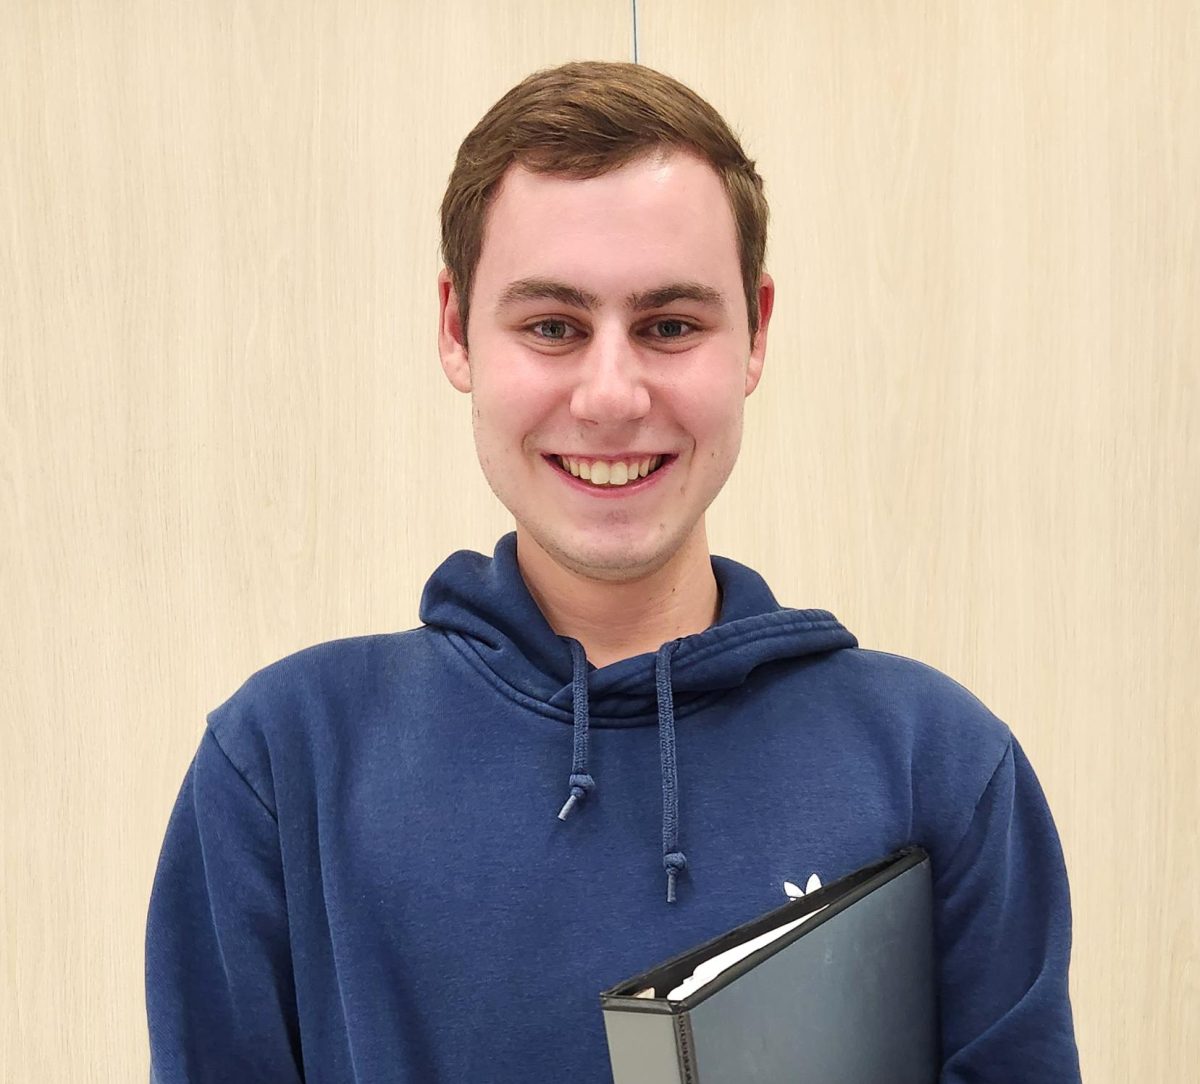 Spring-Ford senior Noah Ott earned a perfect 5 on the AP Research Exam. 

